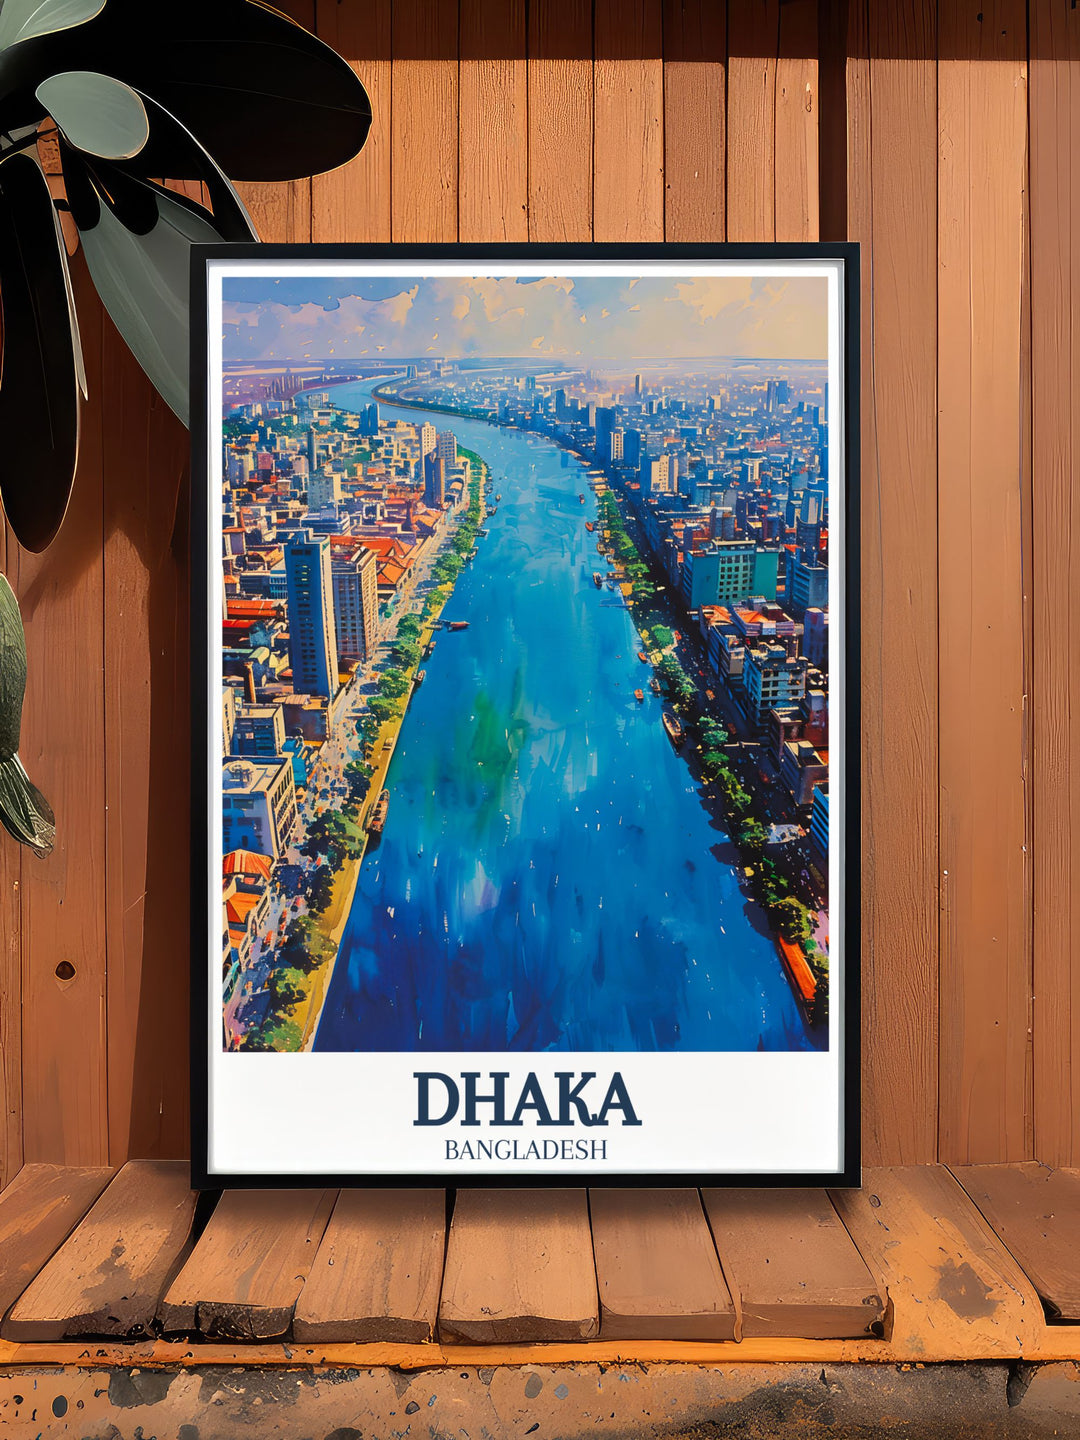 Unique Buriganga river Dhaka vintage print offering a colorful and artistic depiction of the river and city perfect for transforming any room with cultural charm.